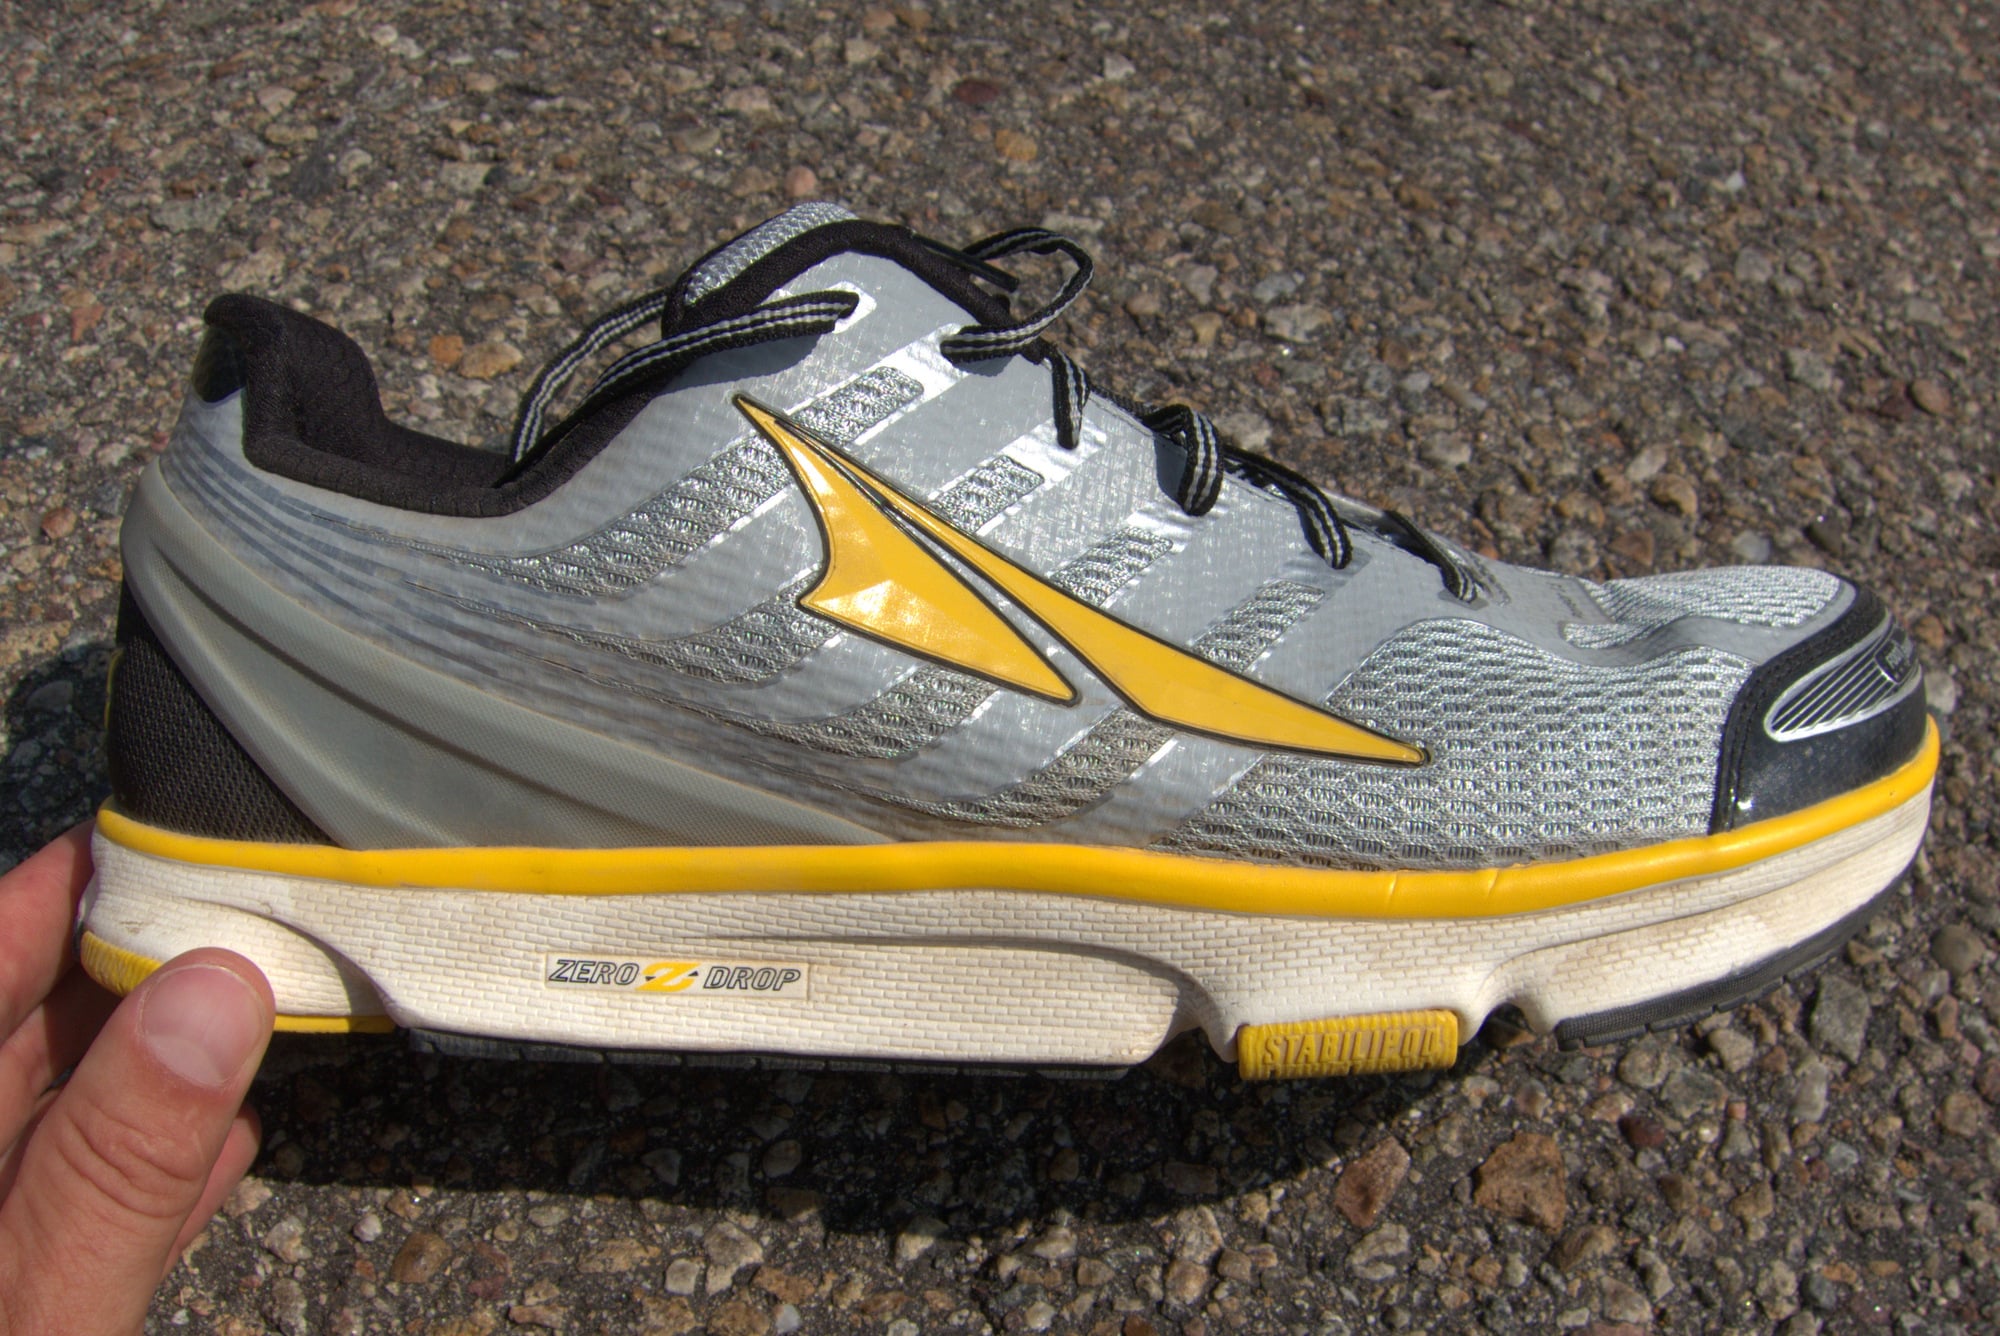 Review: Altra Provision 2.5 || An easy 